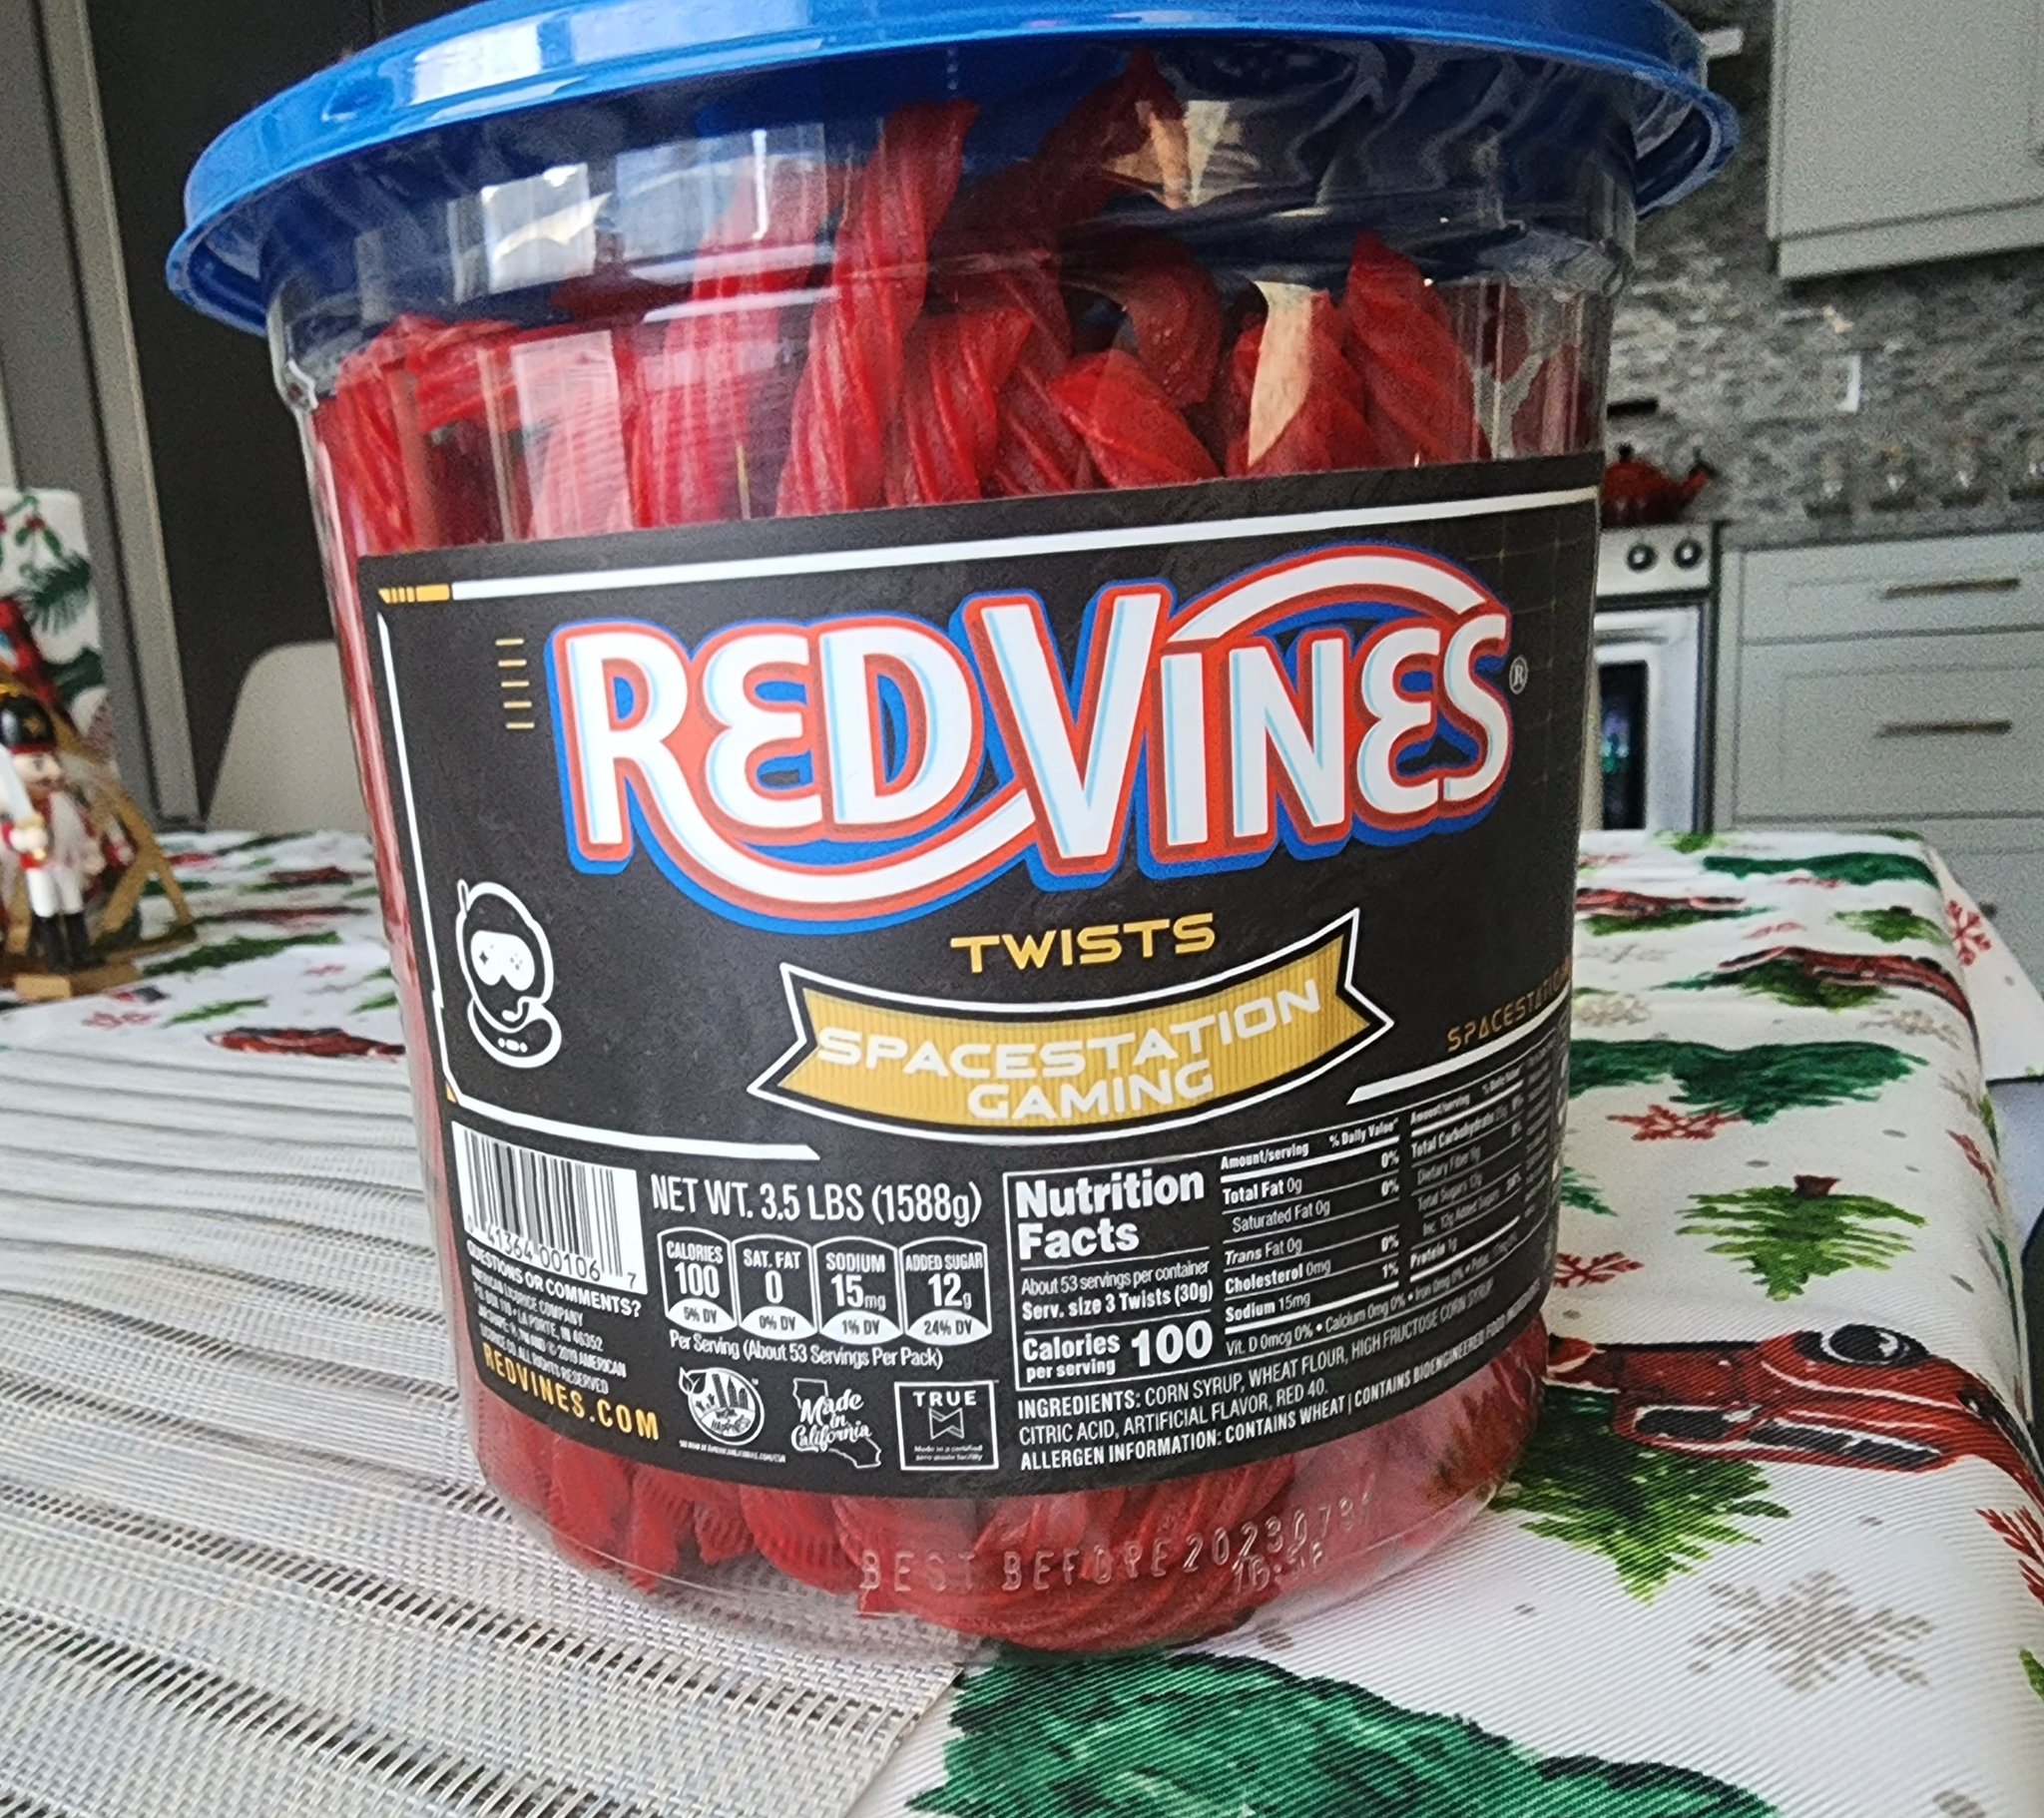 Andrew Trulli on Twitter: "Thank you for the bucket of red vines 🙏 top tier holidays 🎄 https://t.co/d5qrSf6Mze" /